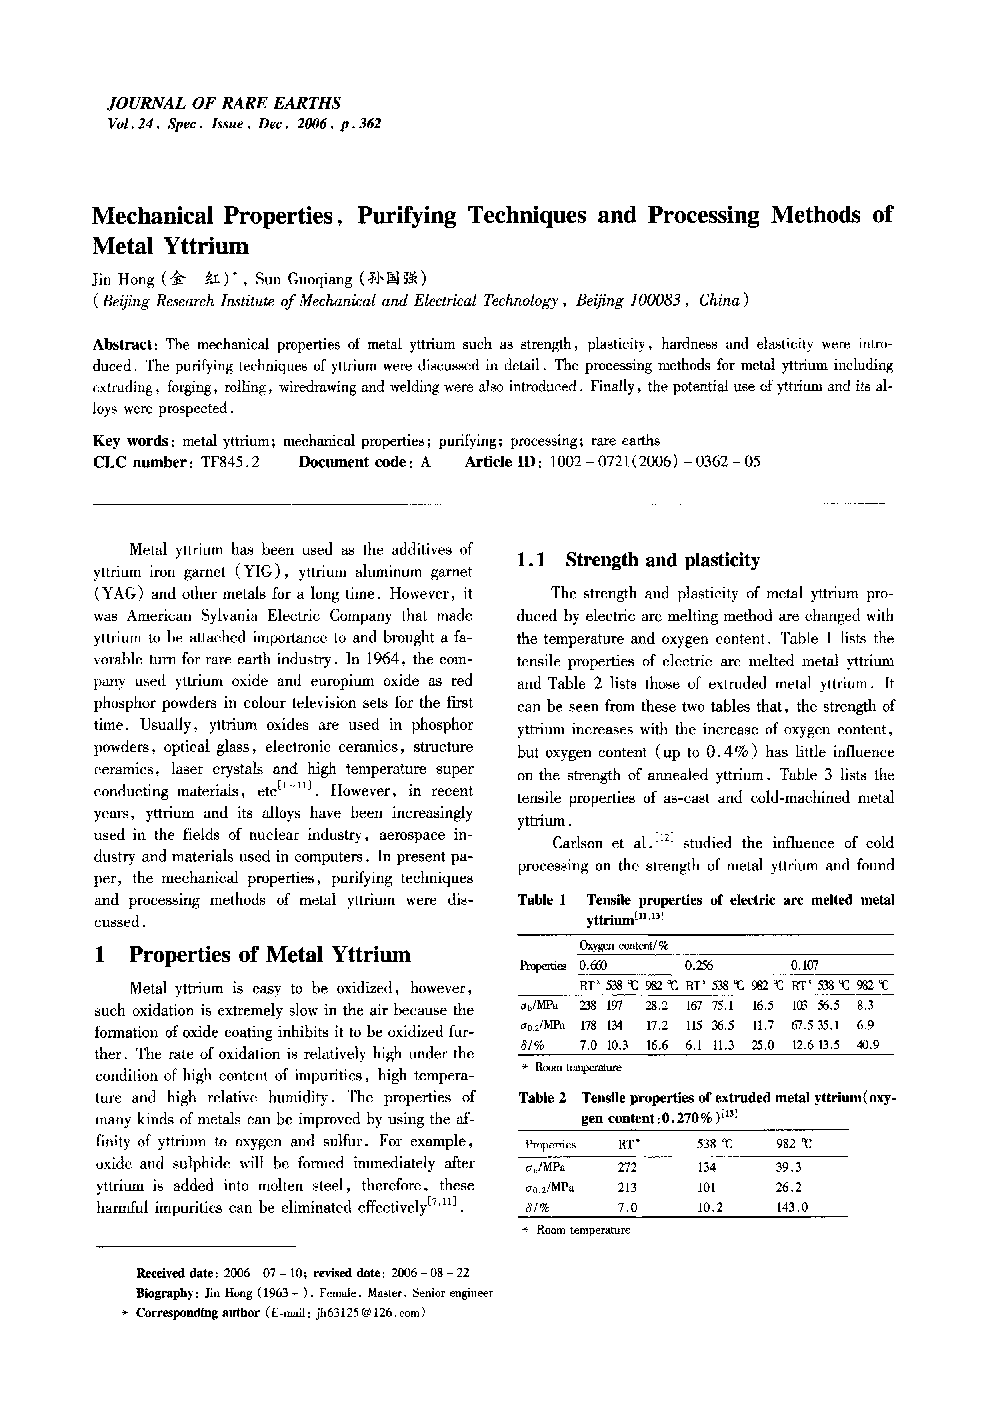 Mechanical Properties, Purifying Techniques and Processing Methods of Metal Yttrium